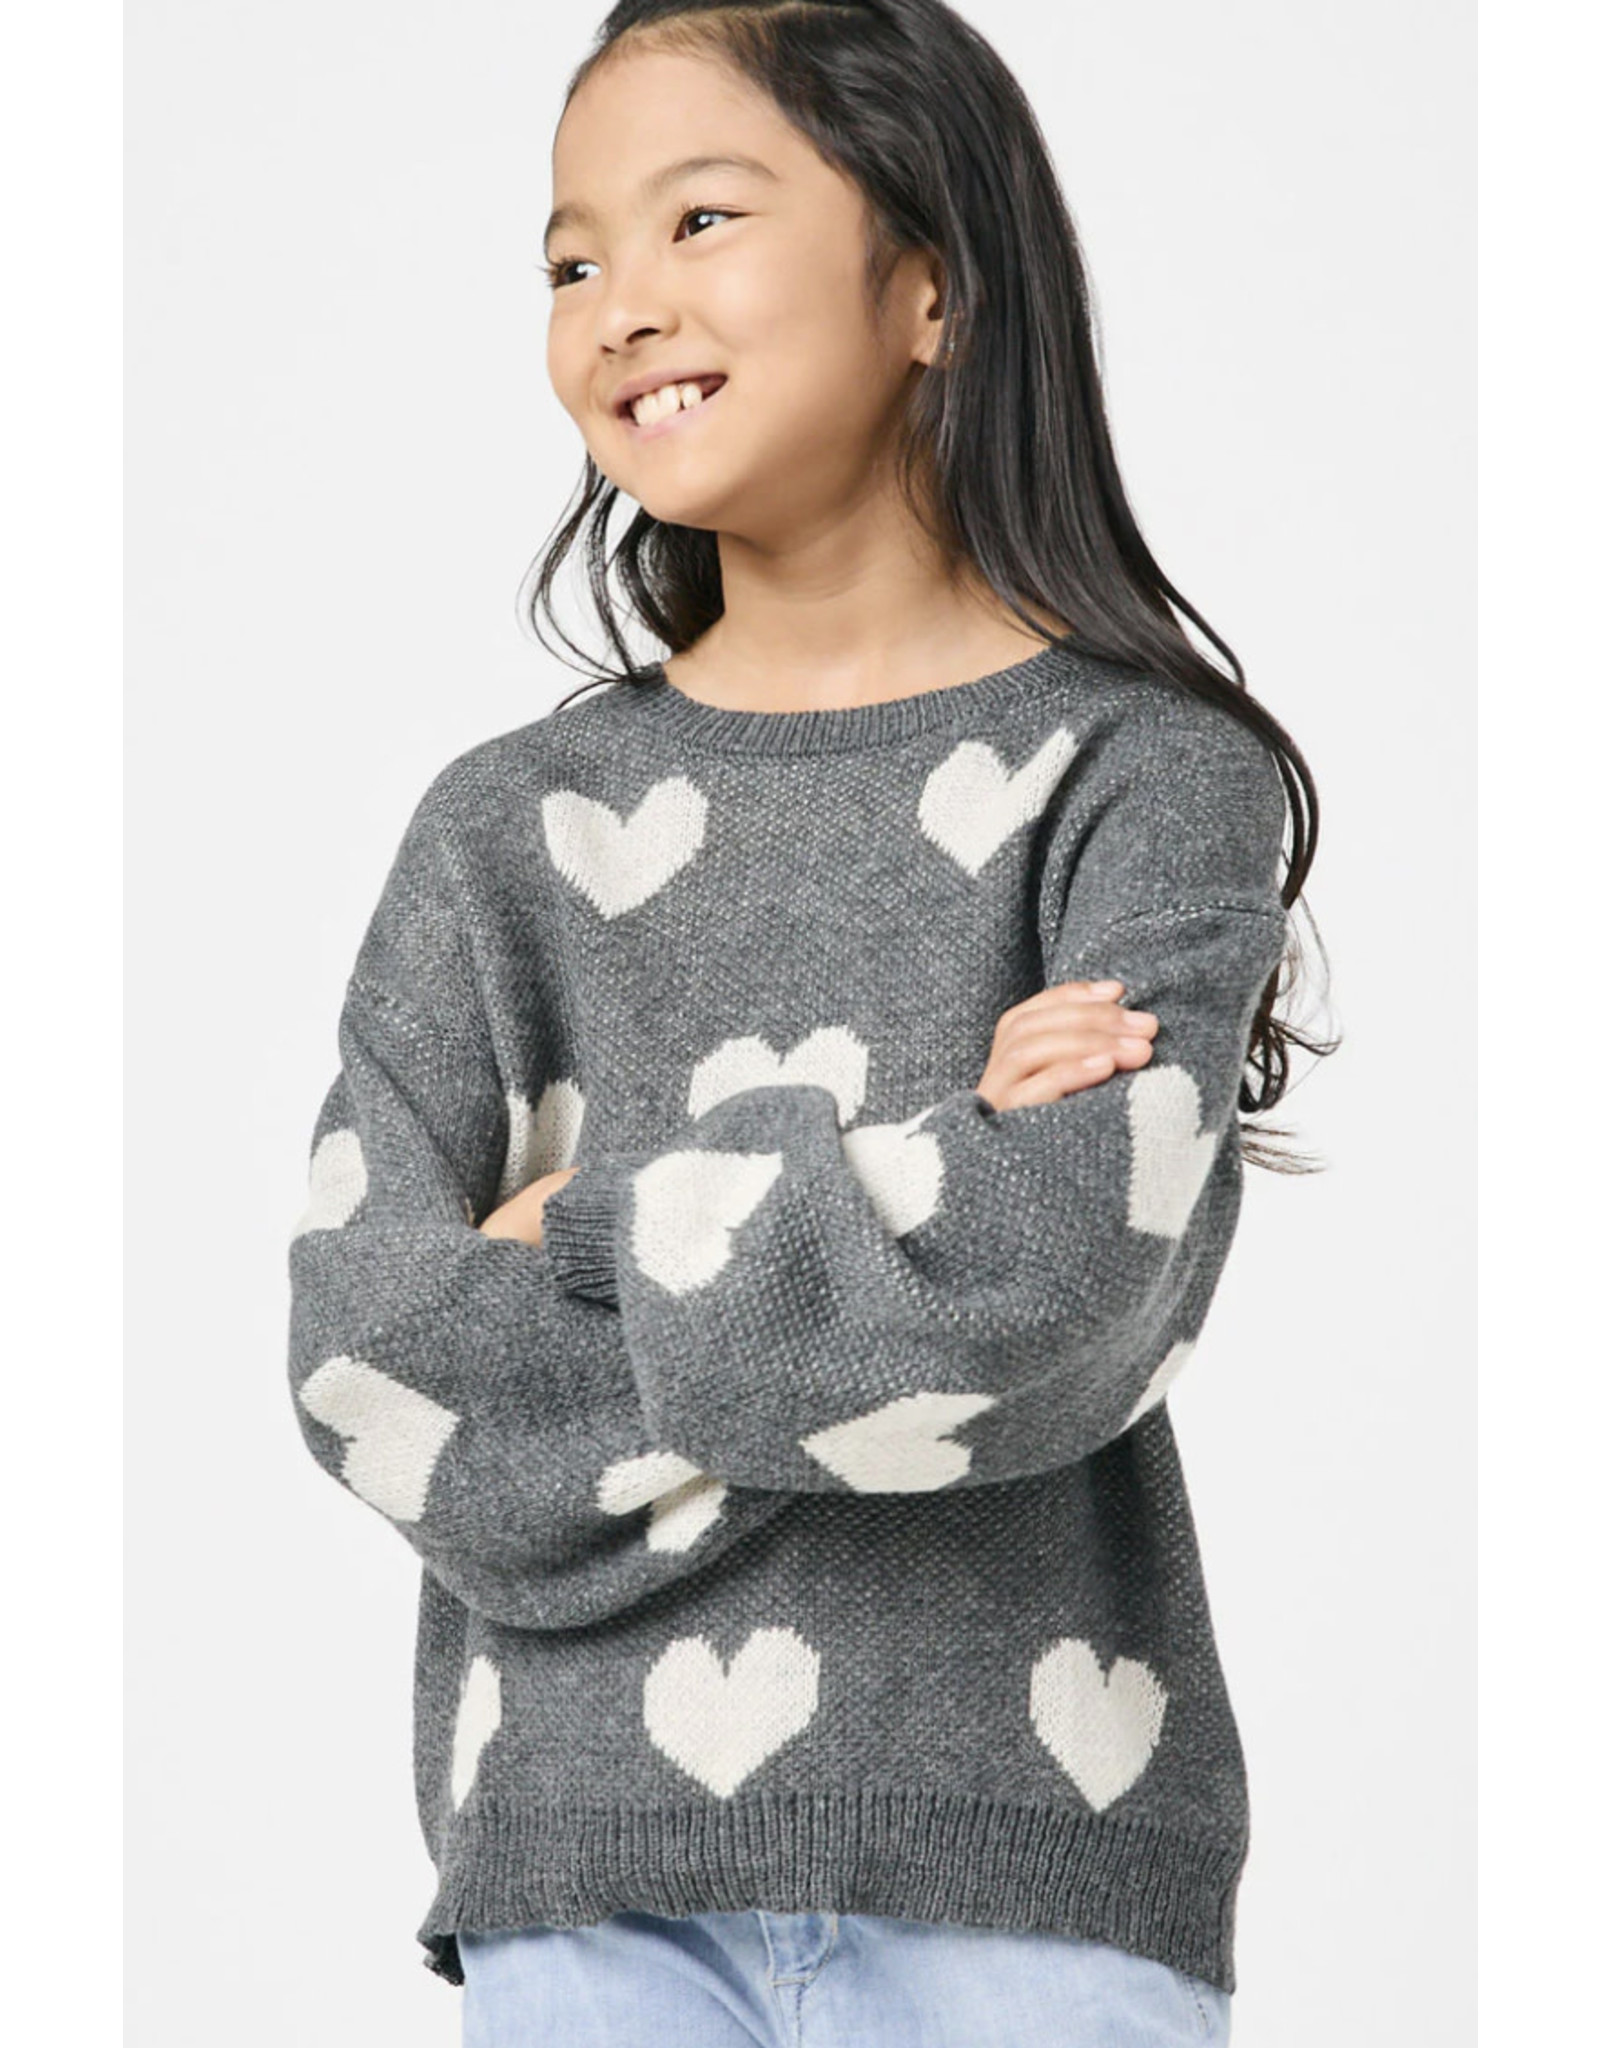 Hayden- Charcoal Knitted Heart Sweater